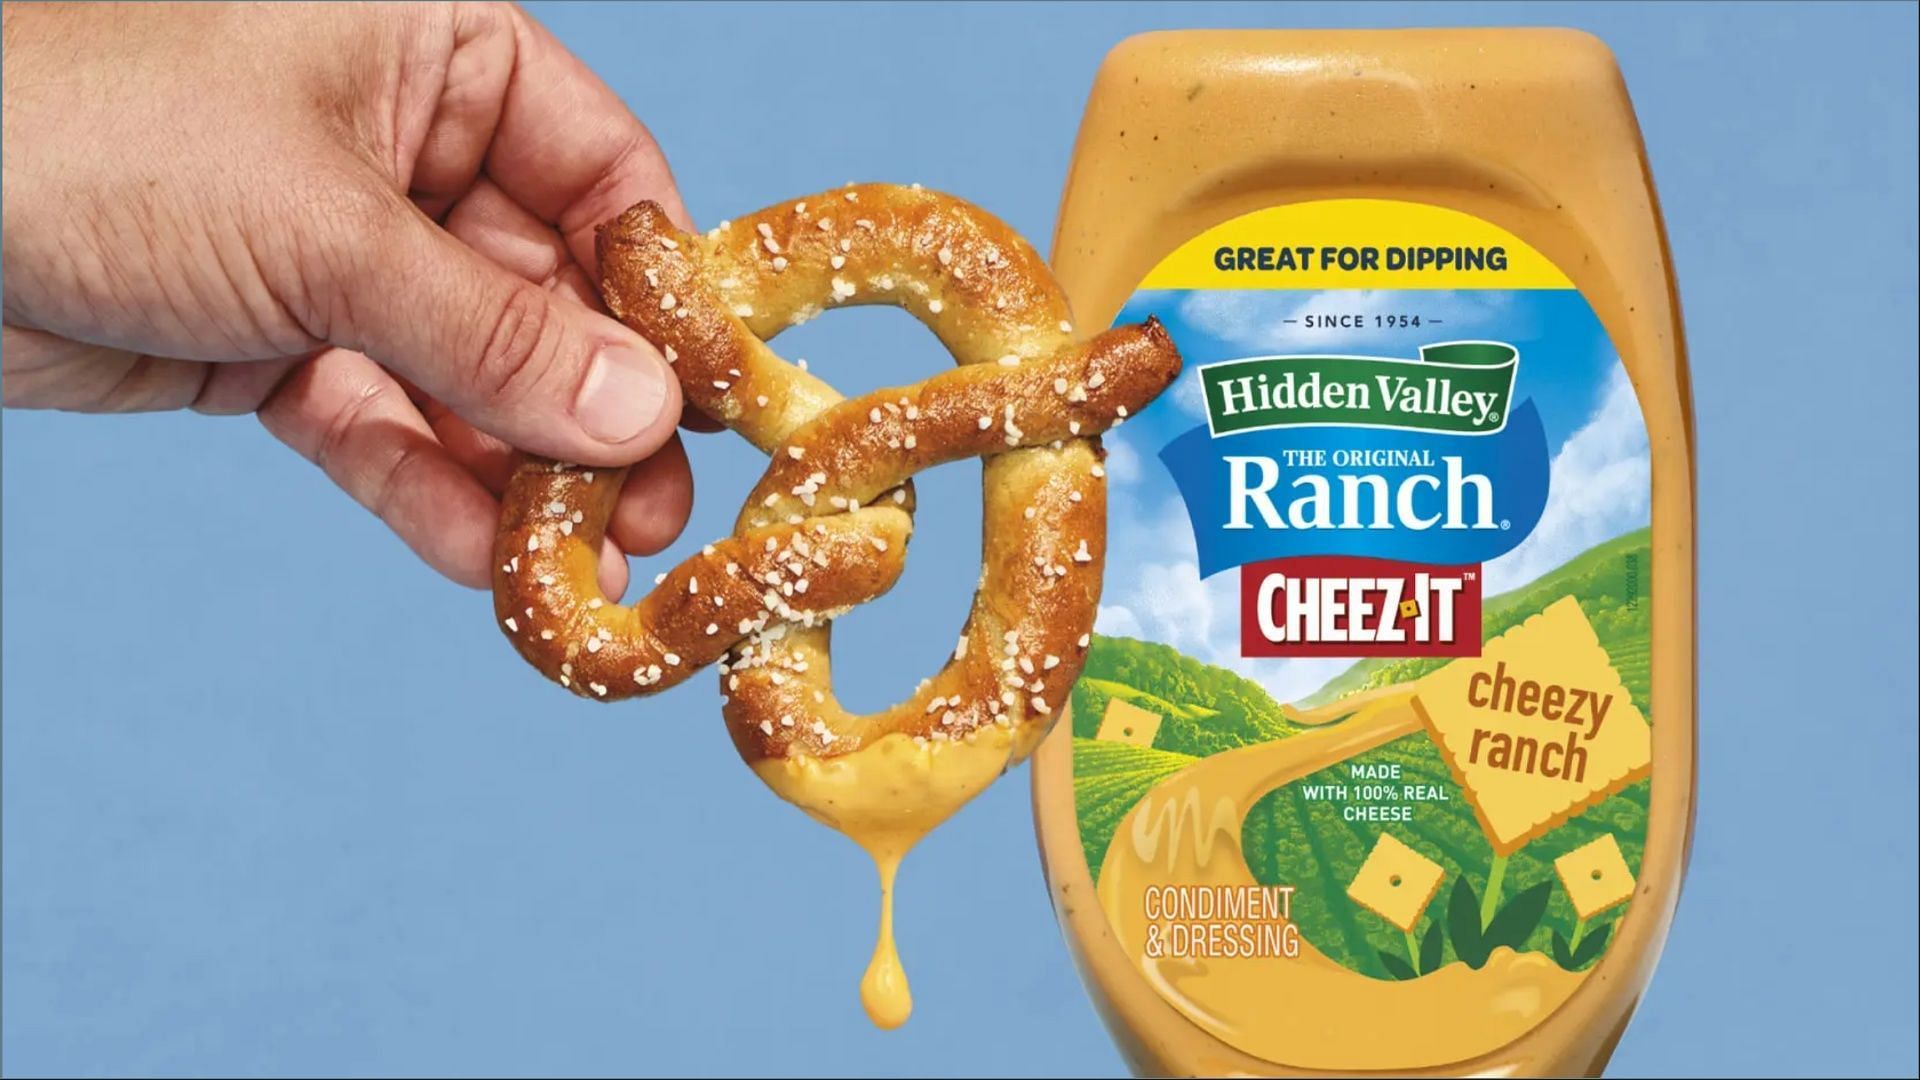 The Cheezy Ranch is priced at over $5.99 (Image via Hidden Valley Ranch)